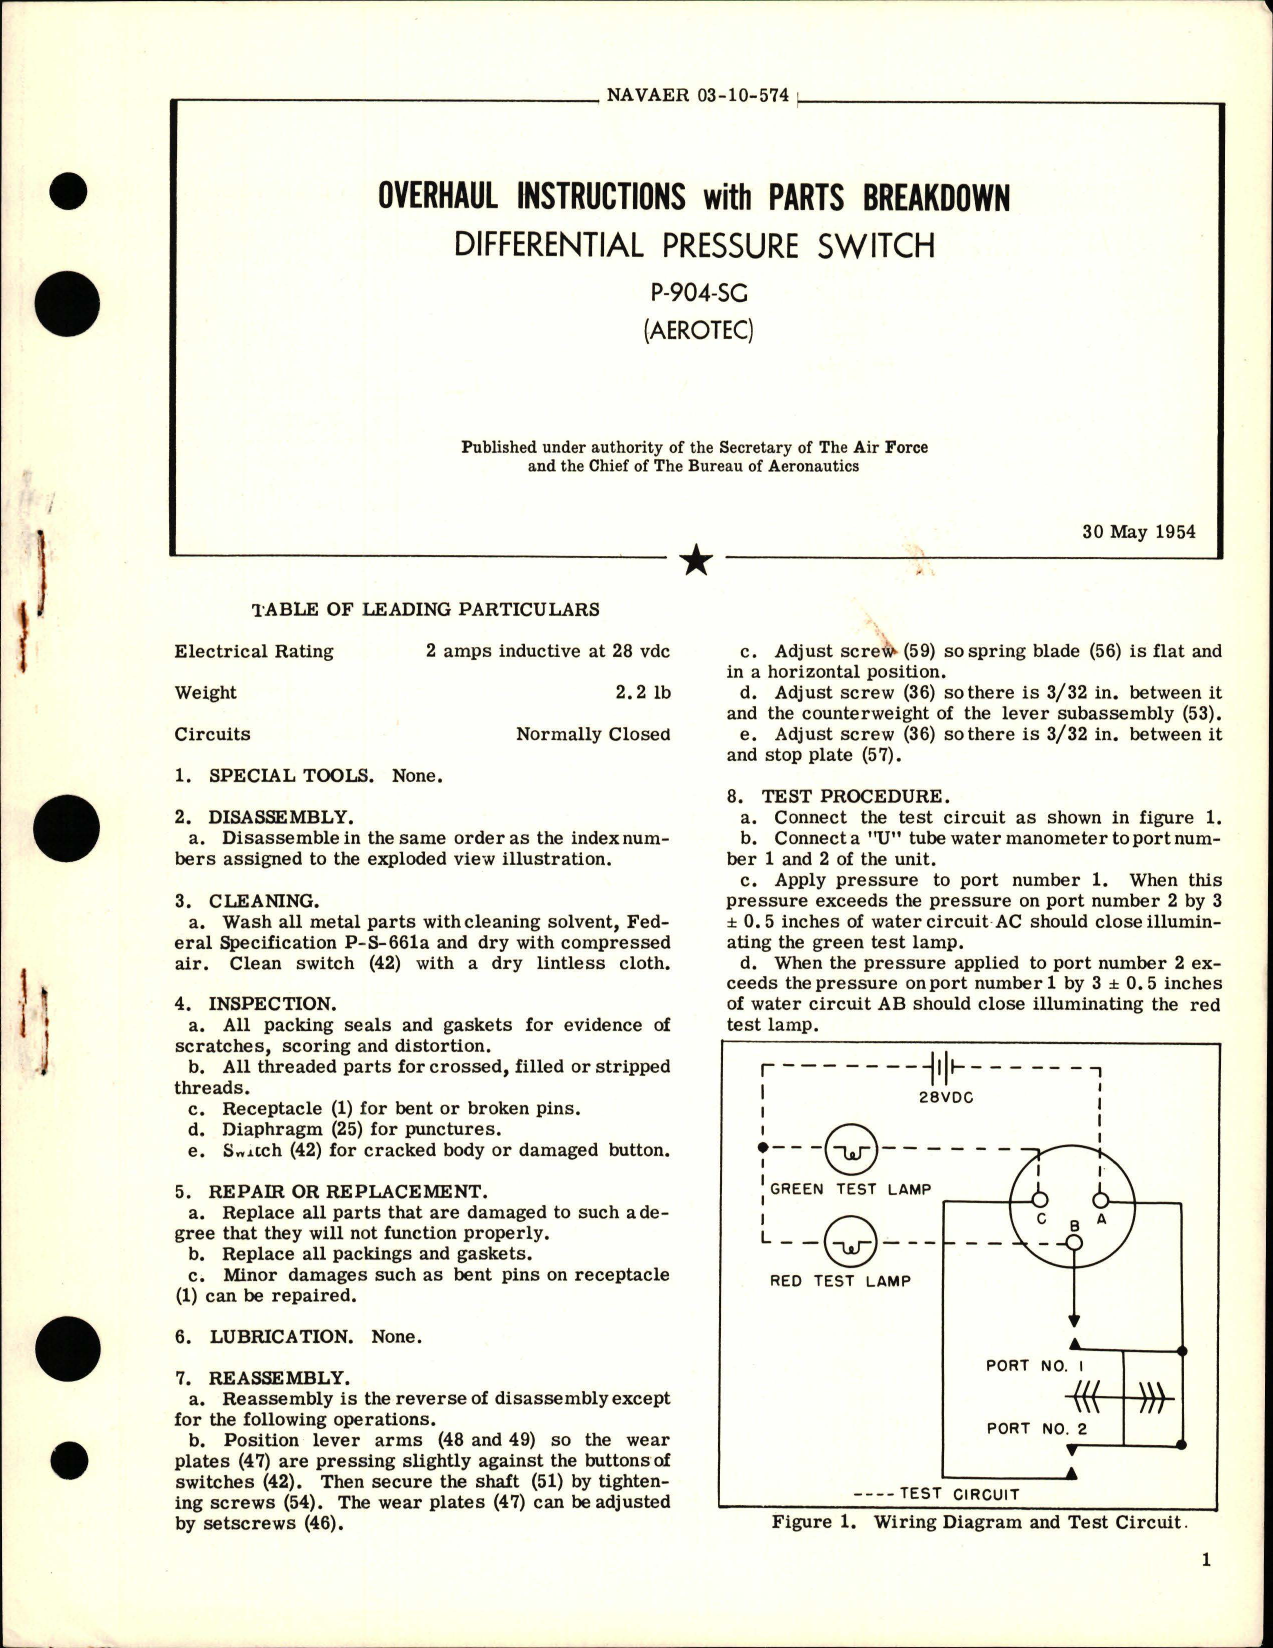 Sample page 1 from AirCorps Library document: Overhaul Instructions with Parts Breakdown for Differential Pressure Switch - P-904-SG